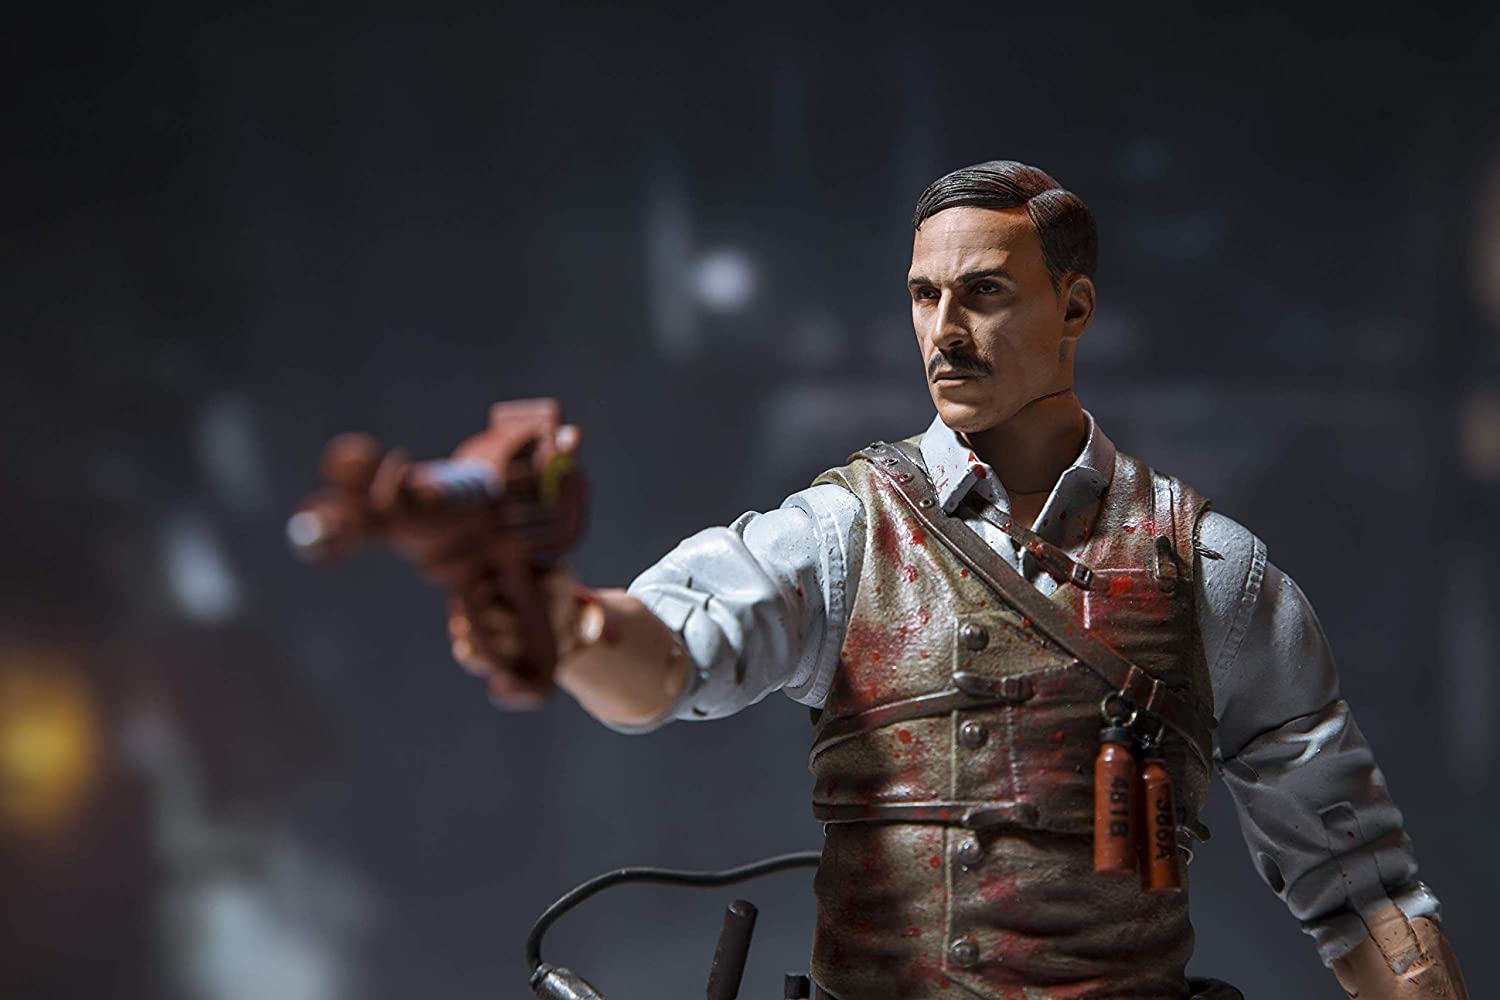 McFarlane Toys | Call of Duty Black Ops 4 | Richtofen Action Figure | Pose